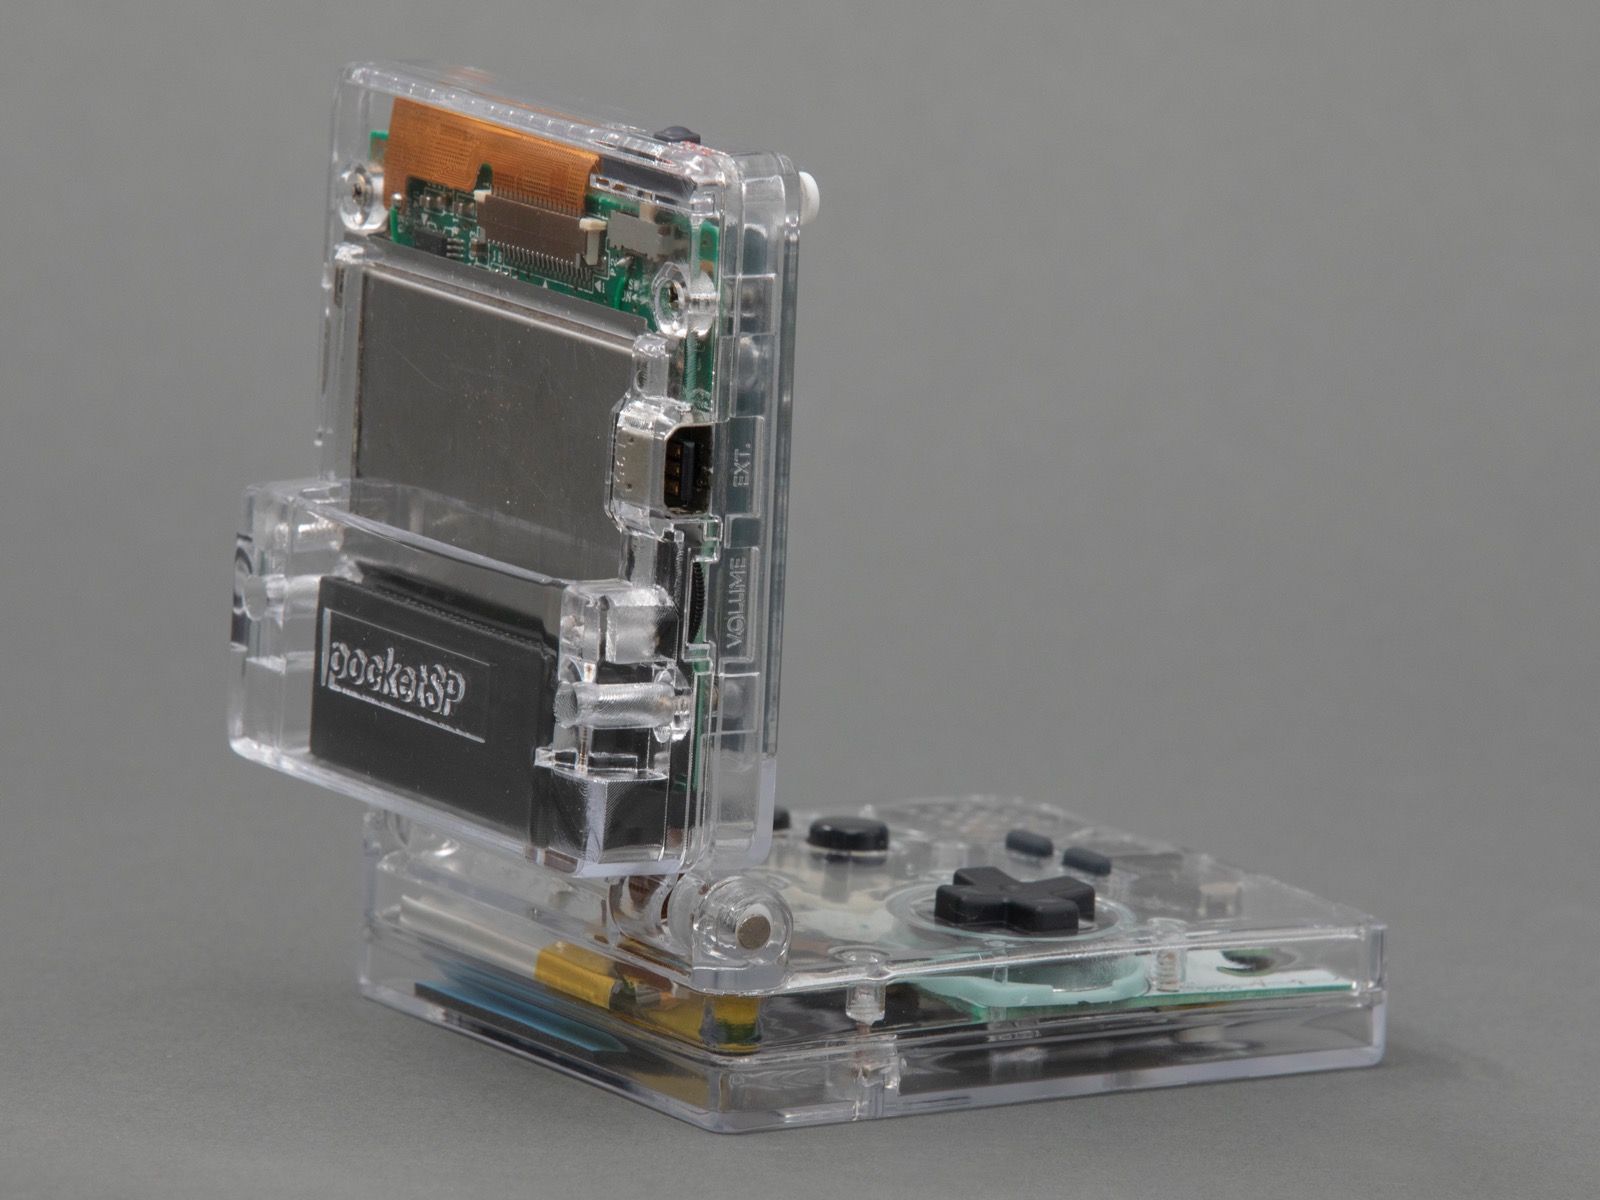 Game Boy Pocket SP in a clear shell